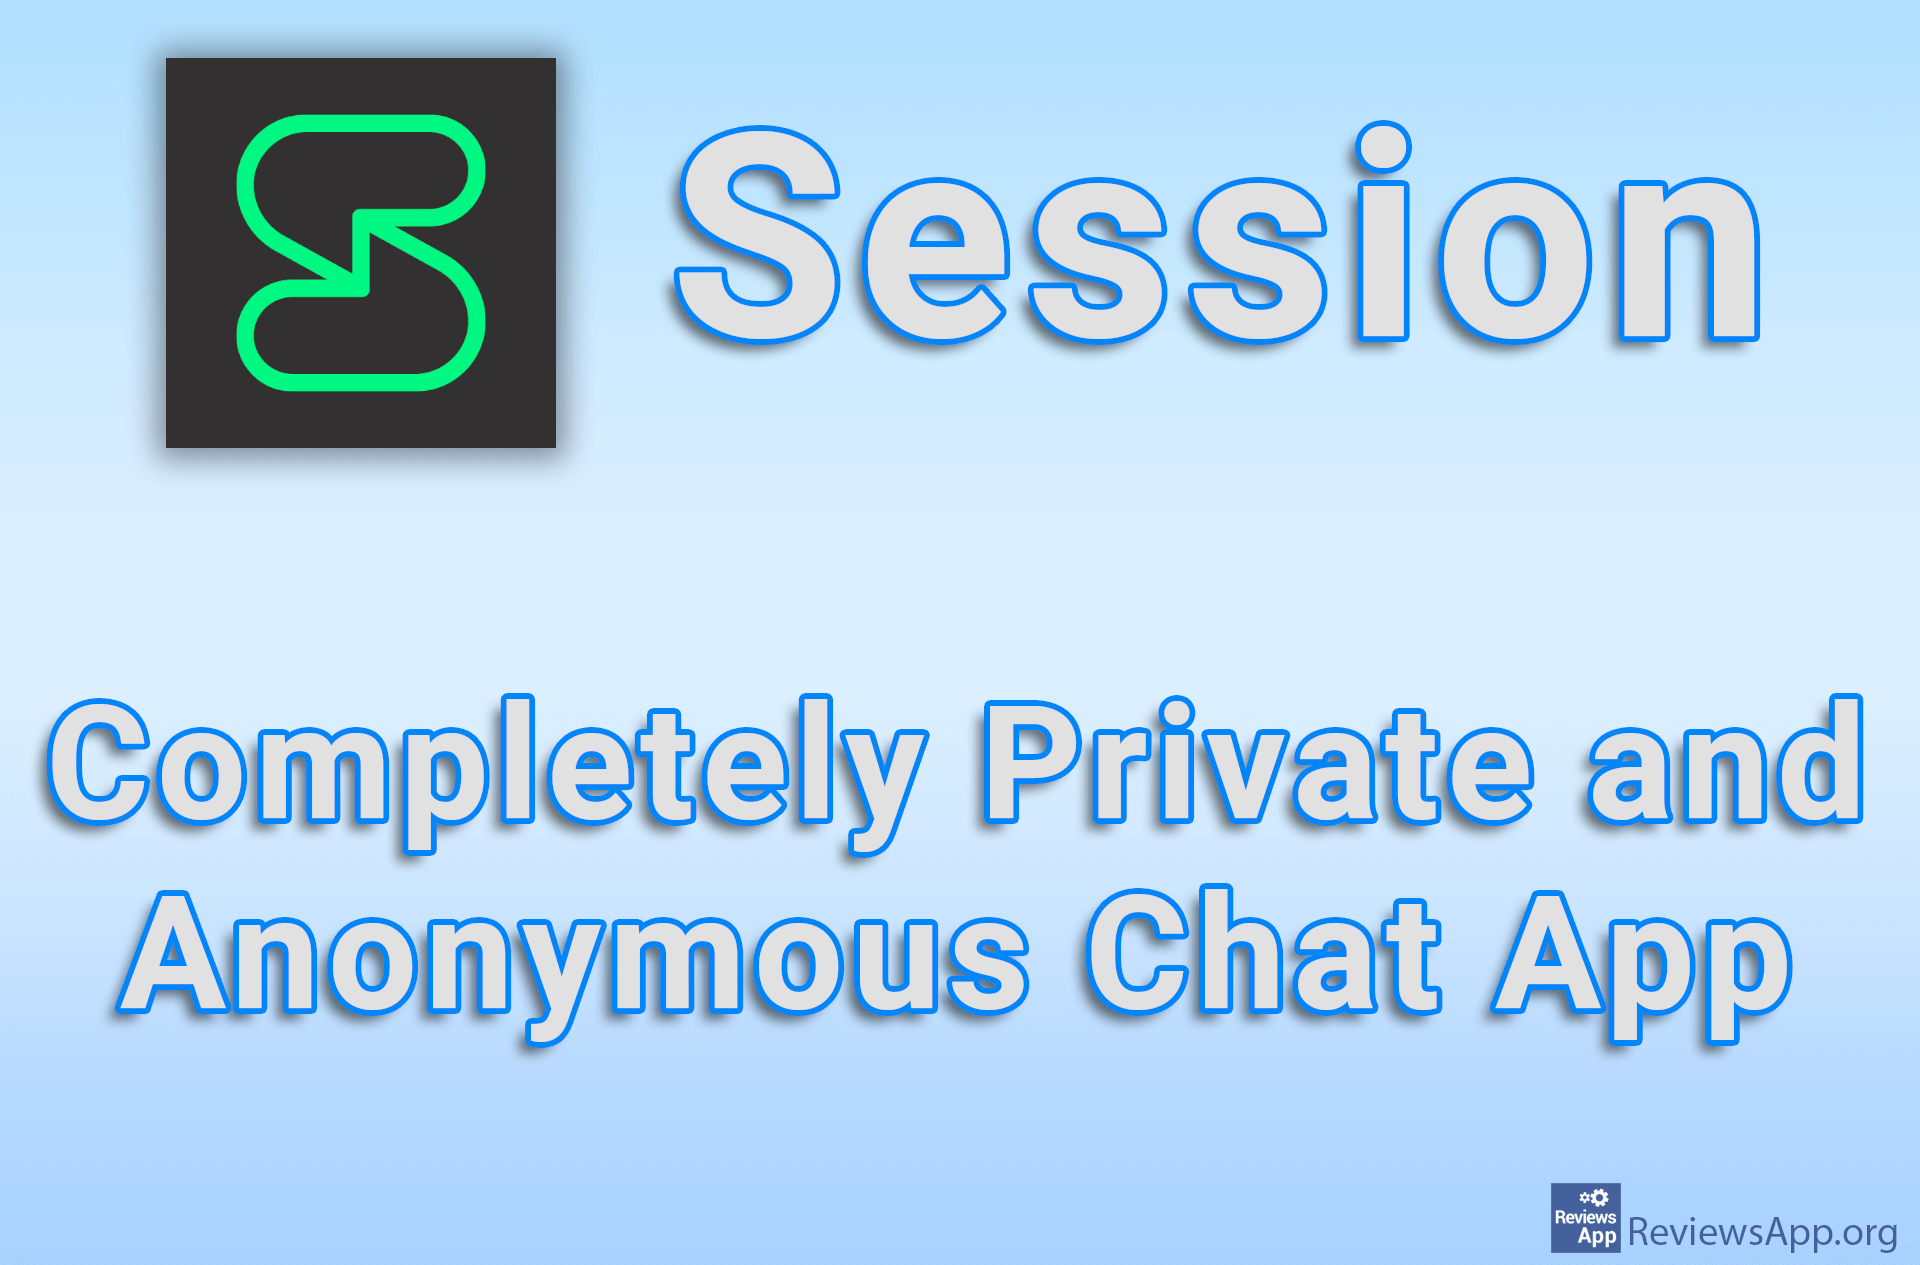 Session – Completely Private and Anonymous Chat App